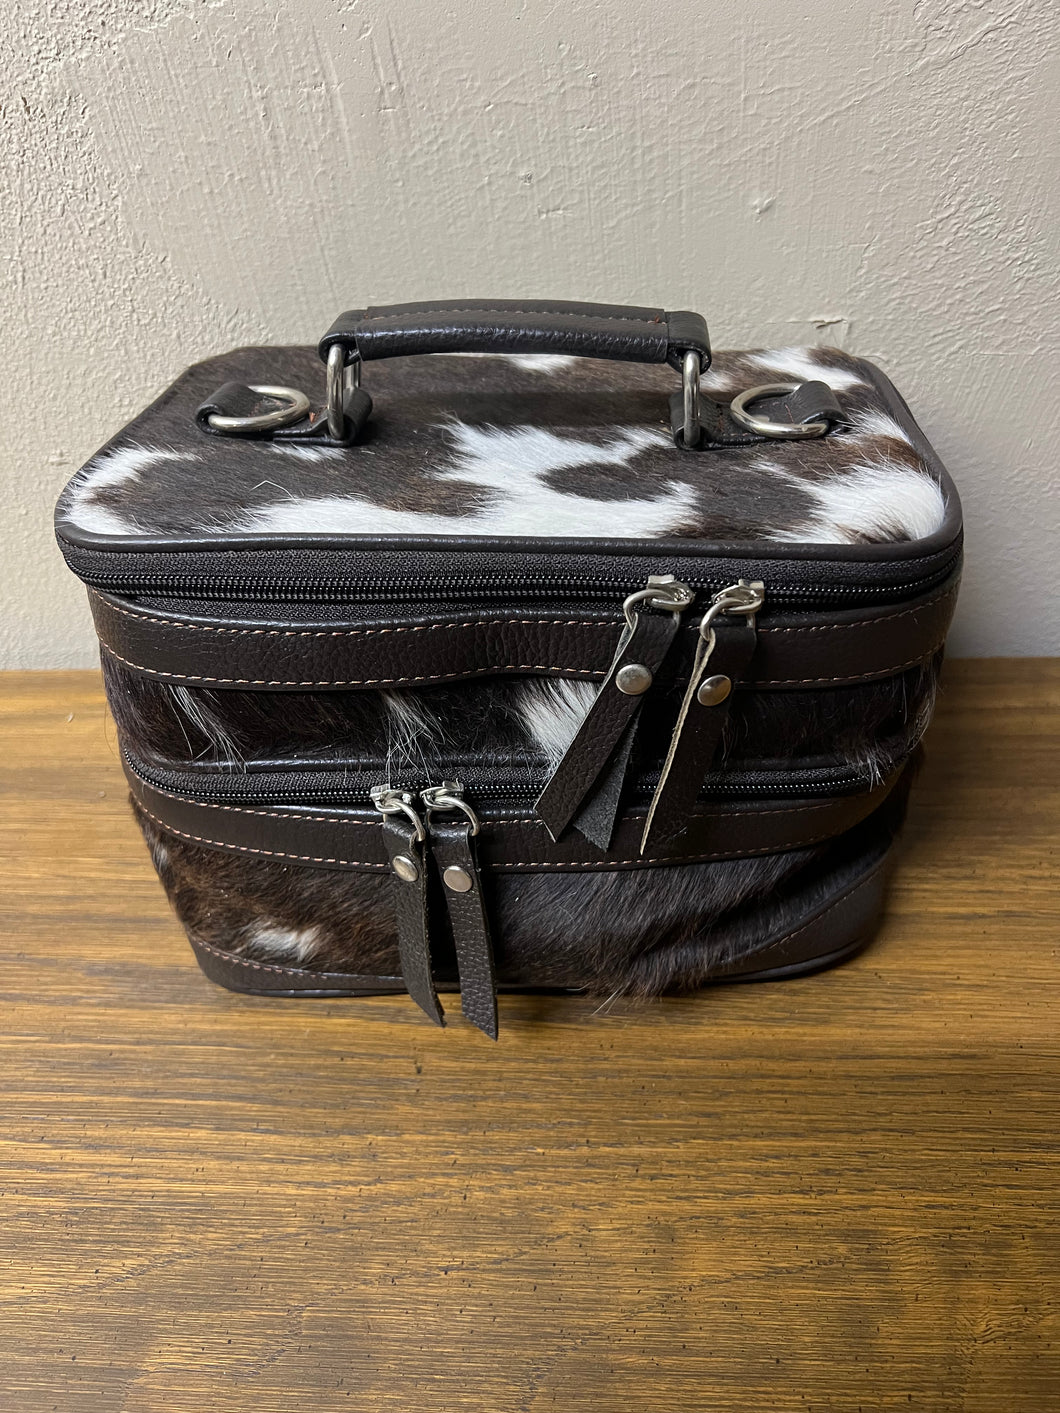 Double decker makeup case, chocolate leather